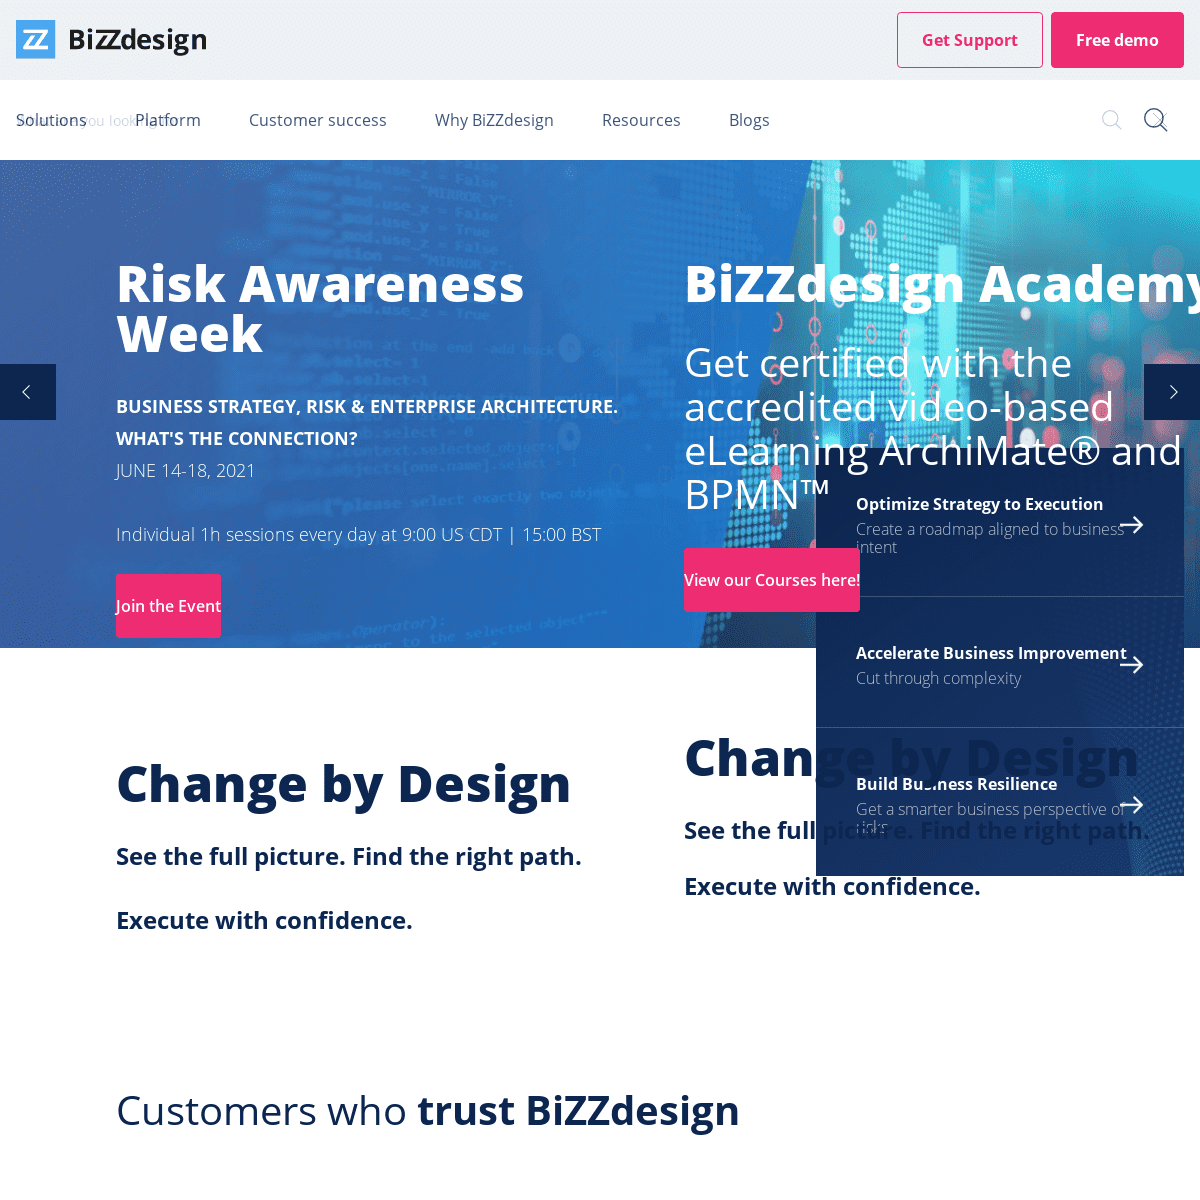 A complete backup of https://bizzdesign.com